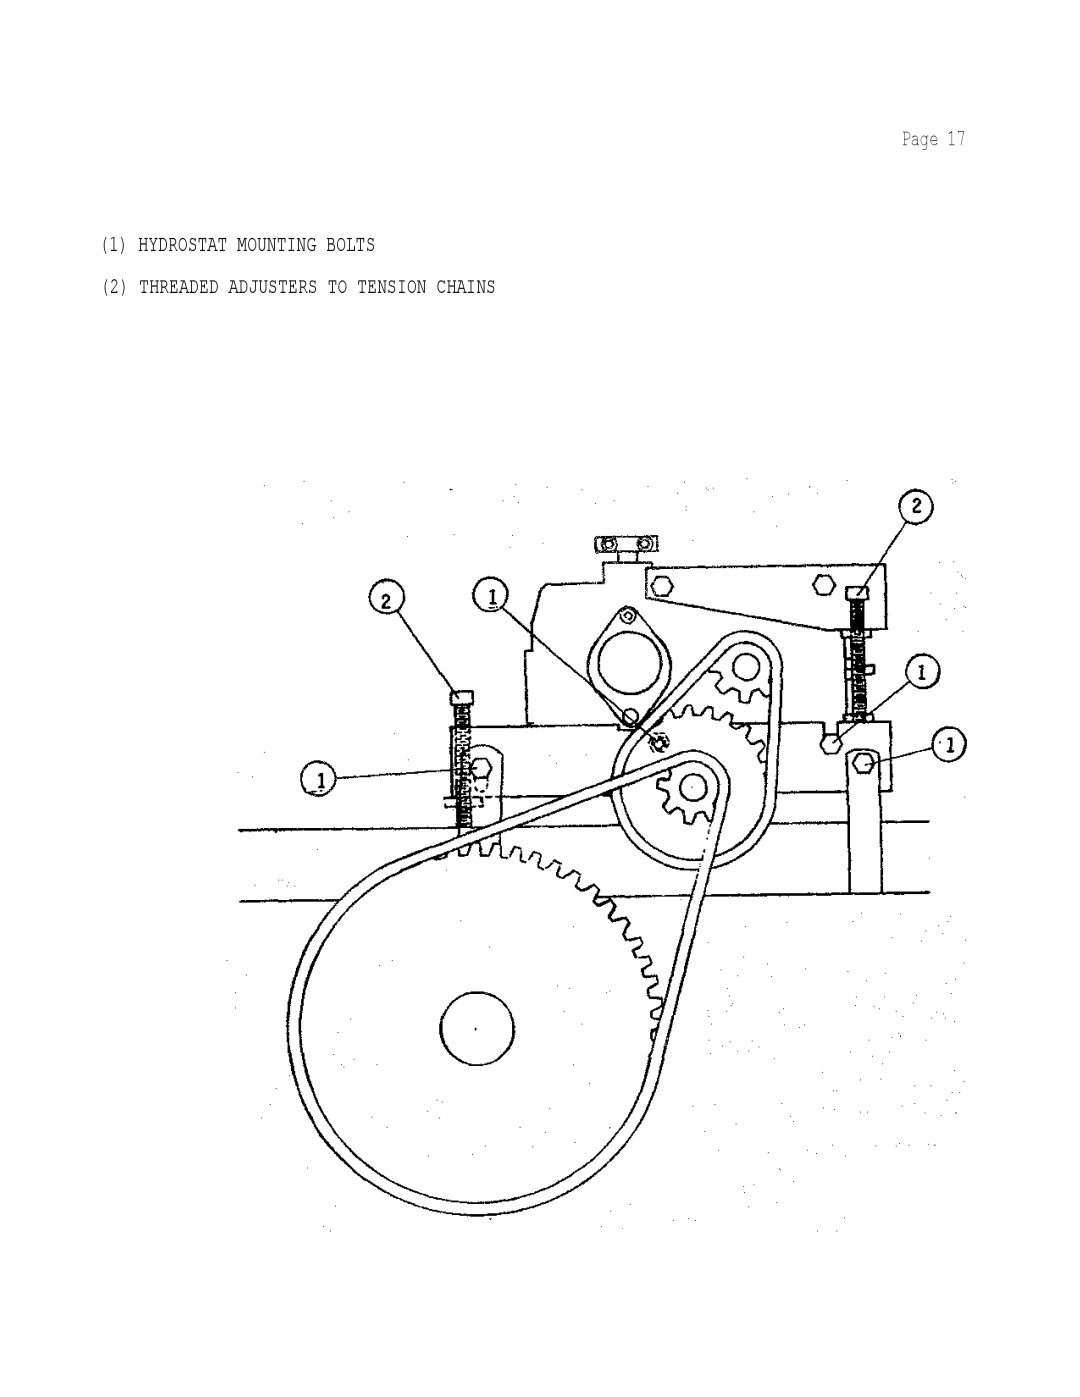 Dixon 501 manual Page 1HYDROSTAT MOUNTING BOLTS, 2THREADED ADJUSTERS TO TENSION CHAINS 